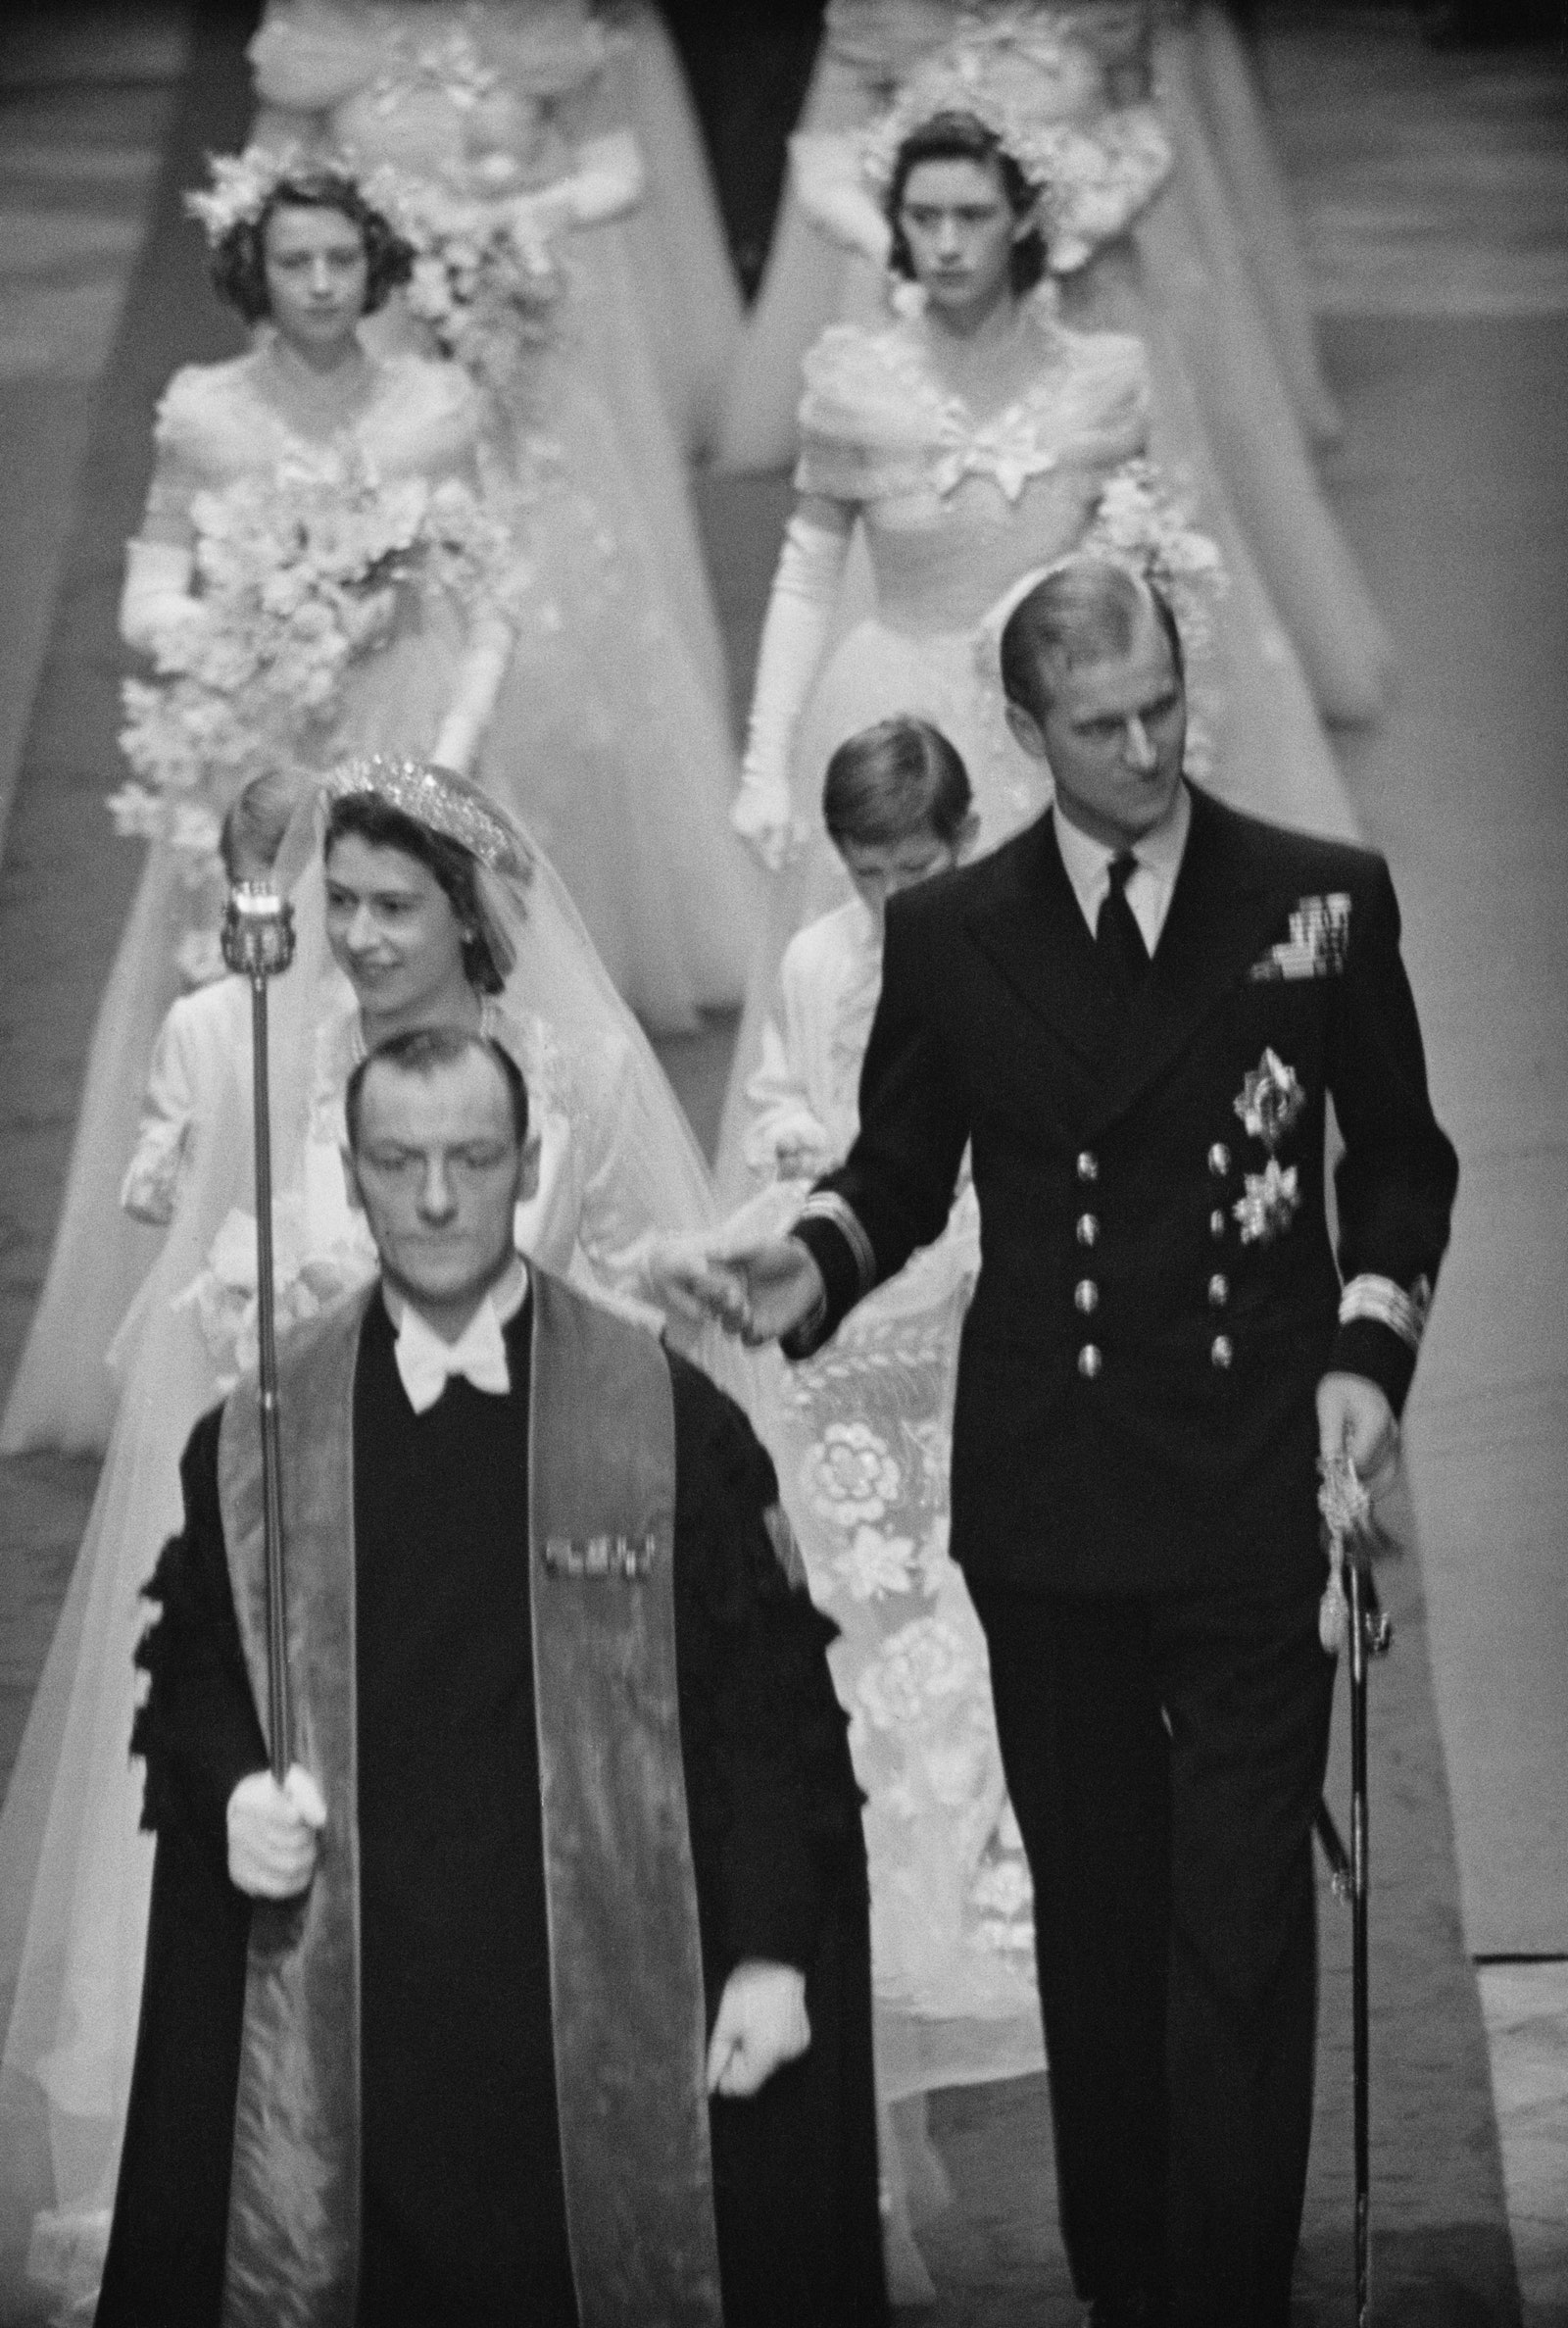 Princess Elizabeth making her way down the aisle with the Duke of Edinburgh, followed by bridesmaids in flower crowns.